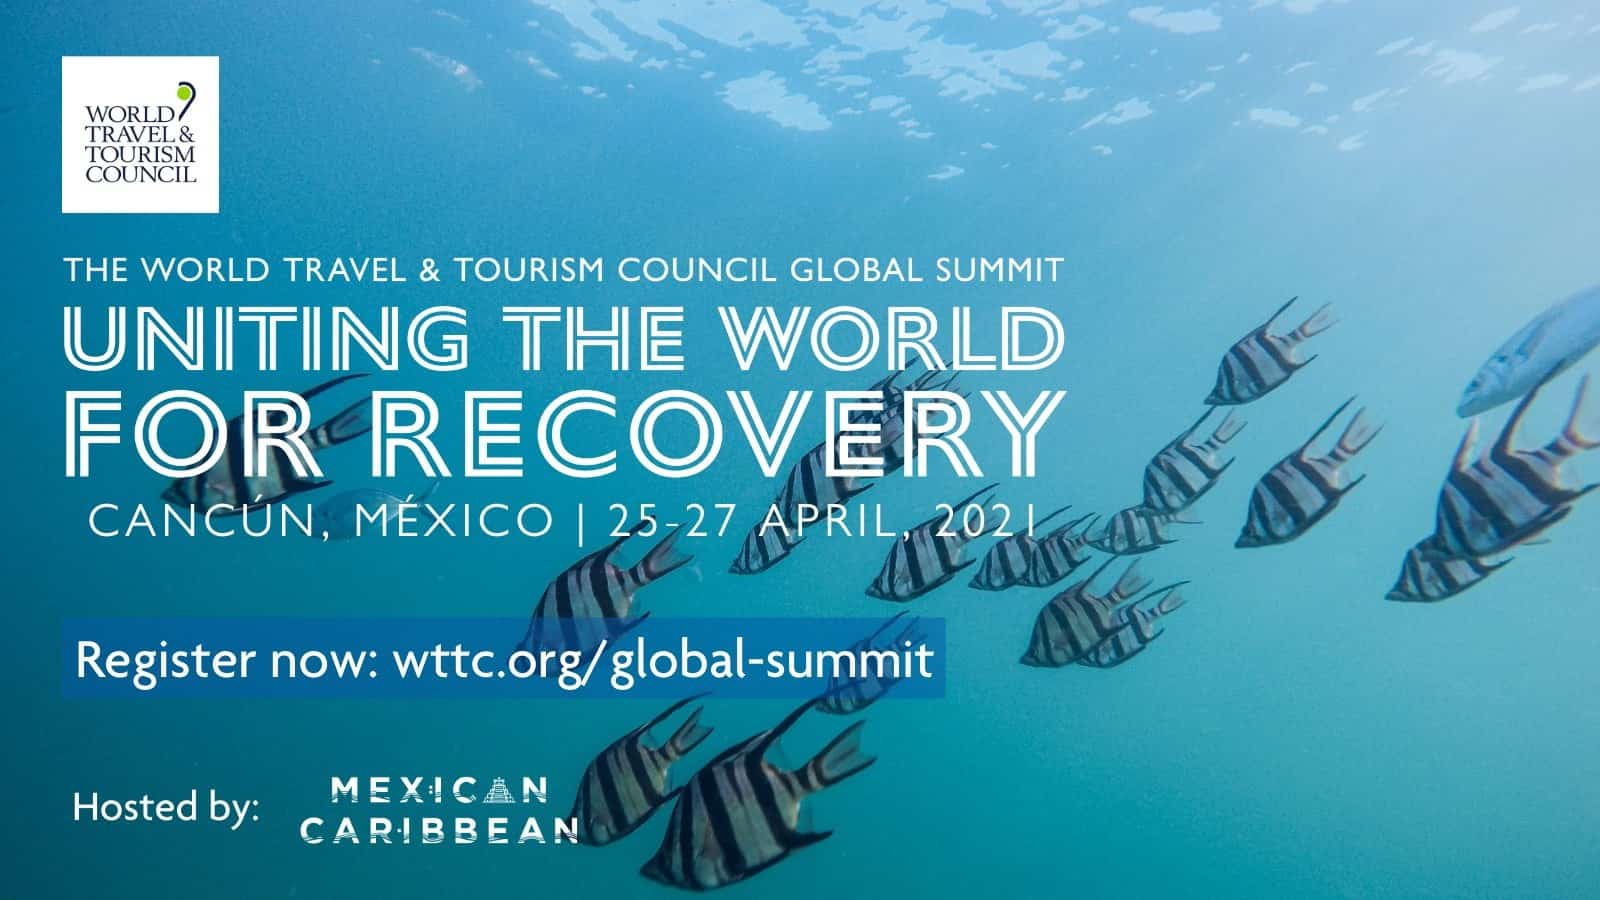 The World Travel & Tourism Council Summit in Cancun in April